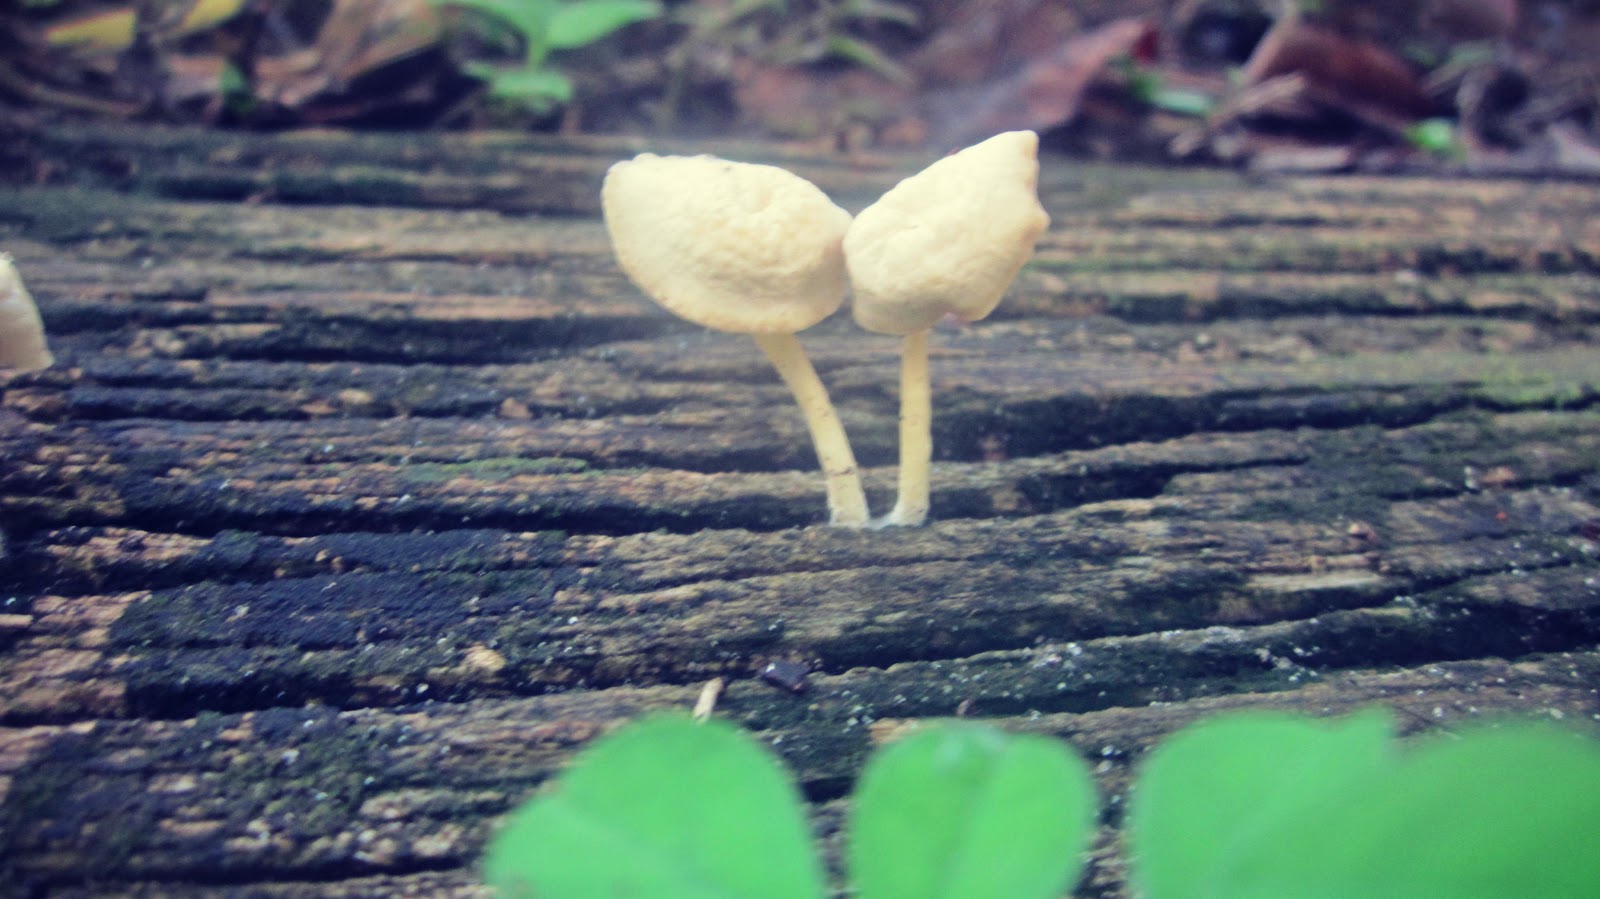 Two tiny white mushrooms in love on a wooden log in Florida